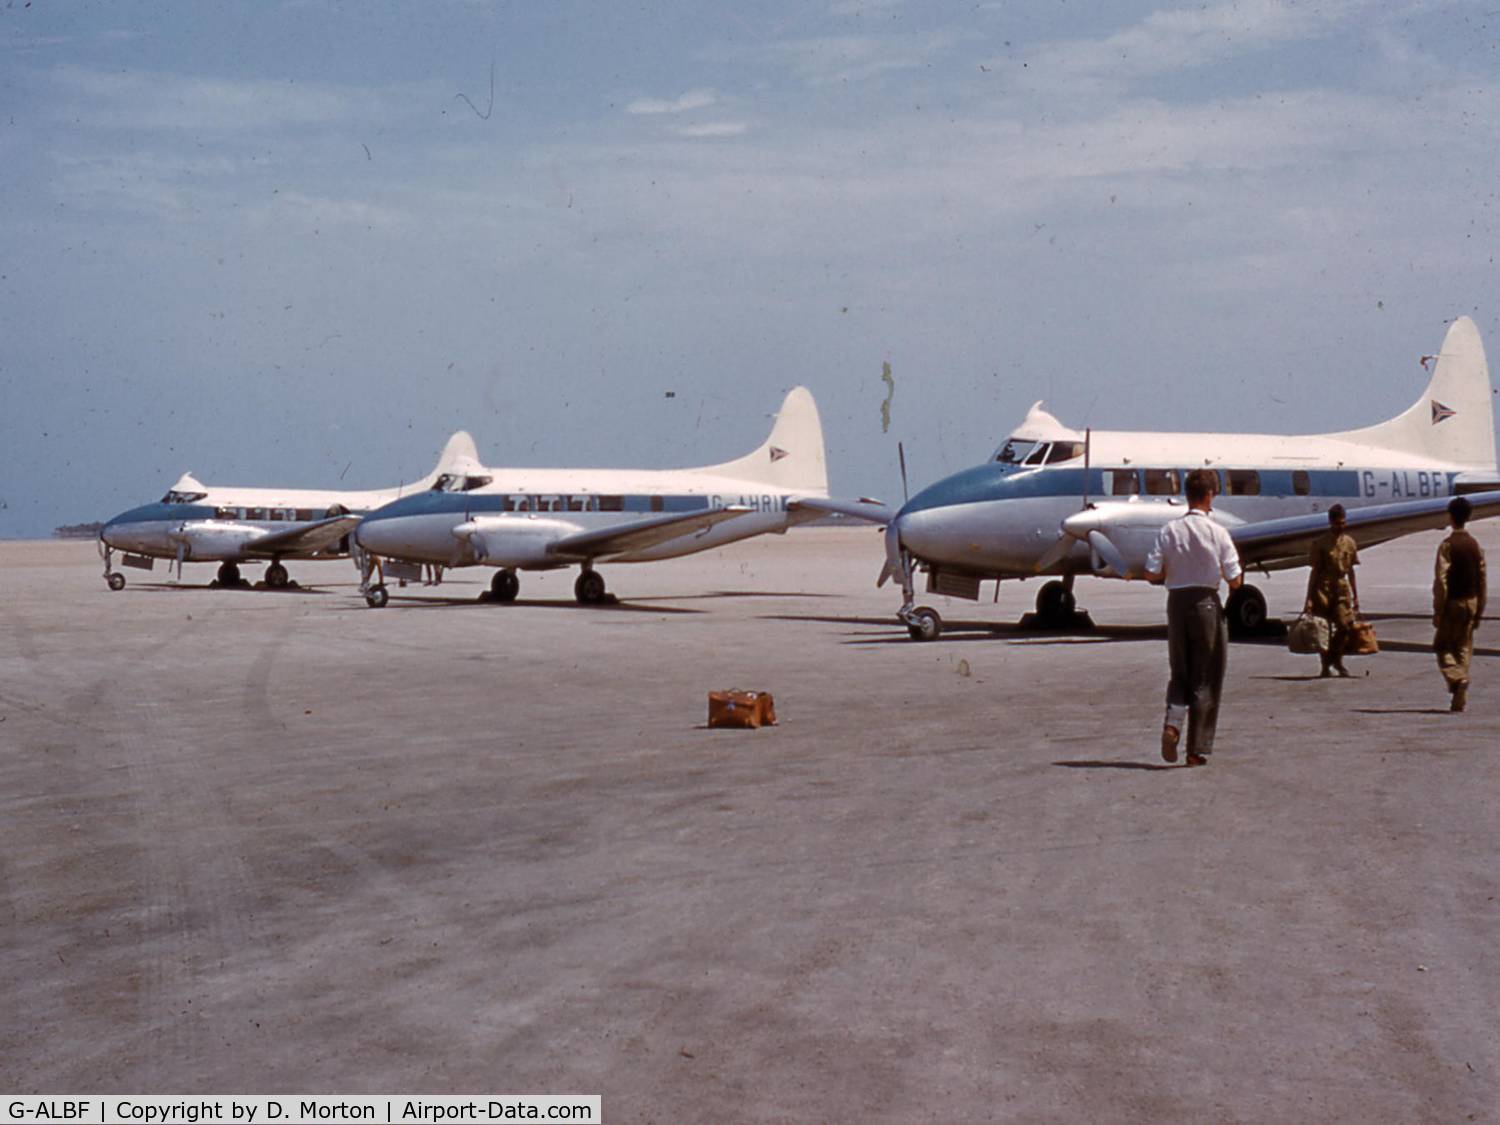 G-ALBF, 1948 De Havilland DH-104 Dove 5 C/N 04152, G-ALBF in the foreground with two other Doves of the Iraq Petroleum Transport Company, Persian Gulf circa 1954